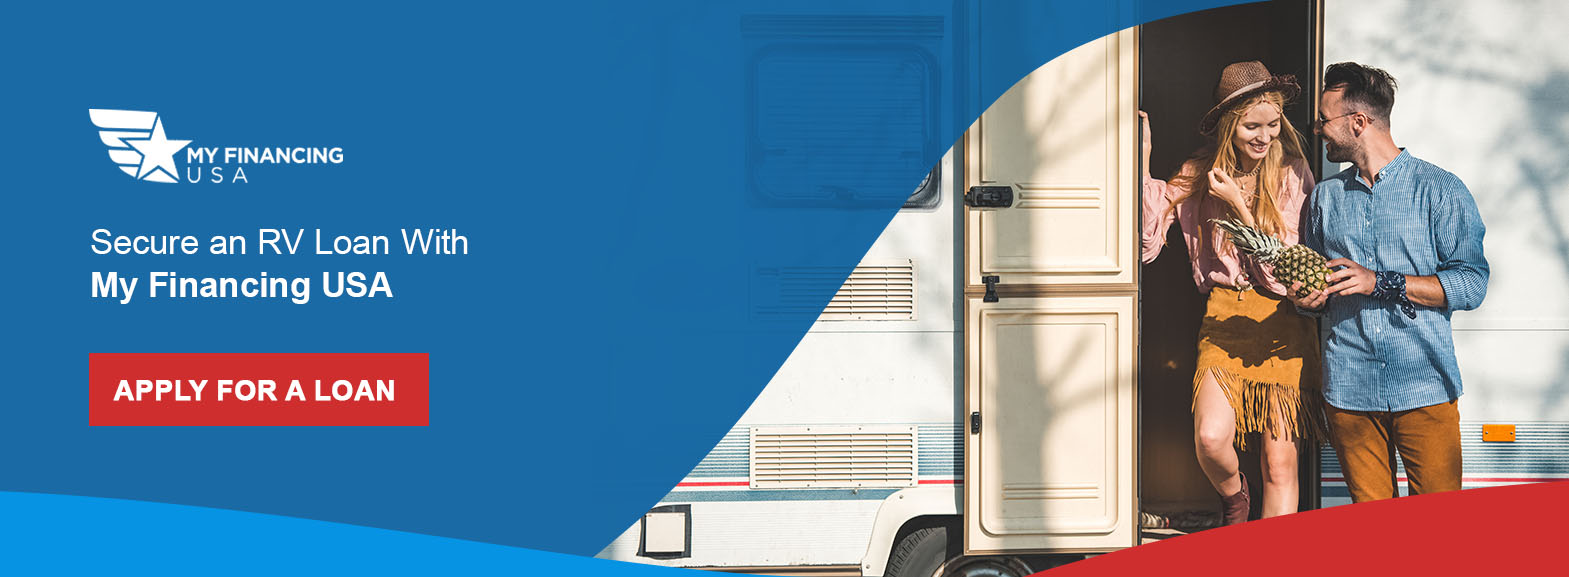 Secure an RV Loan With My Financing USA. Apply for a loan!